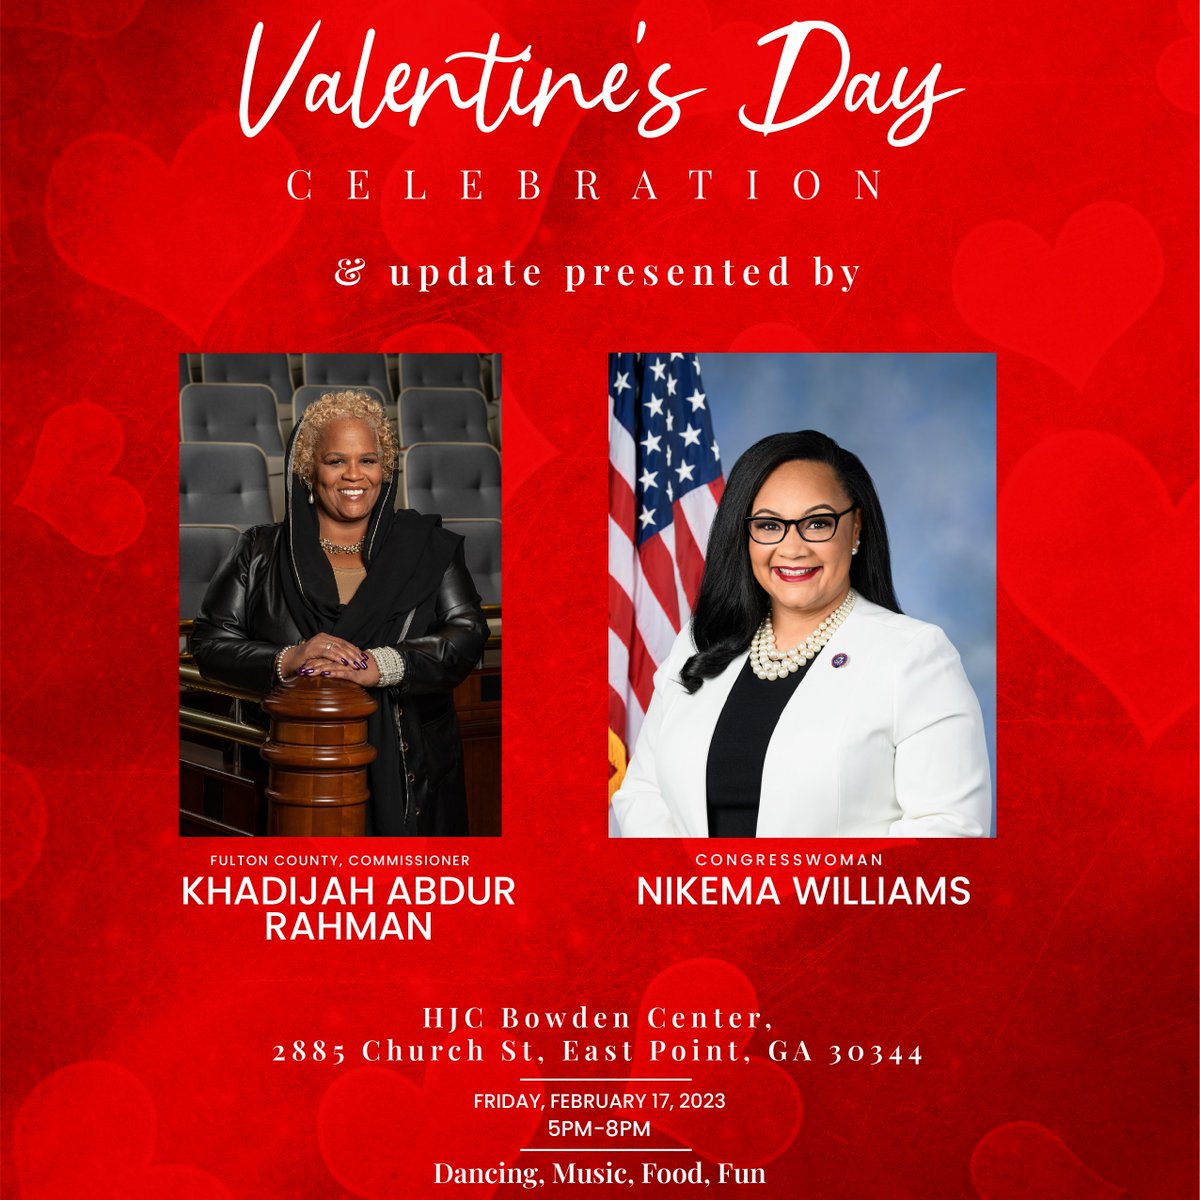 HAPPY VALENTINE'S DAY Please Join Us.